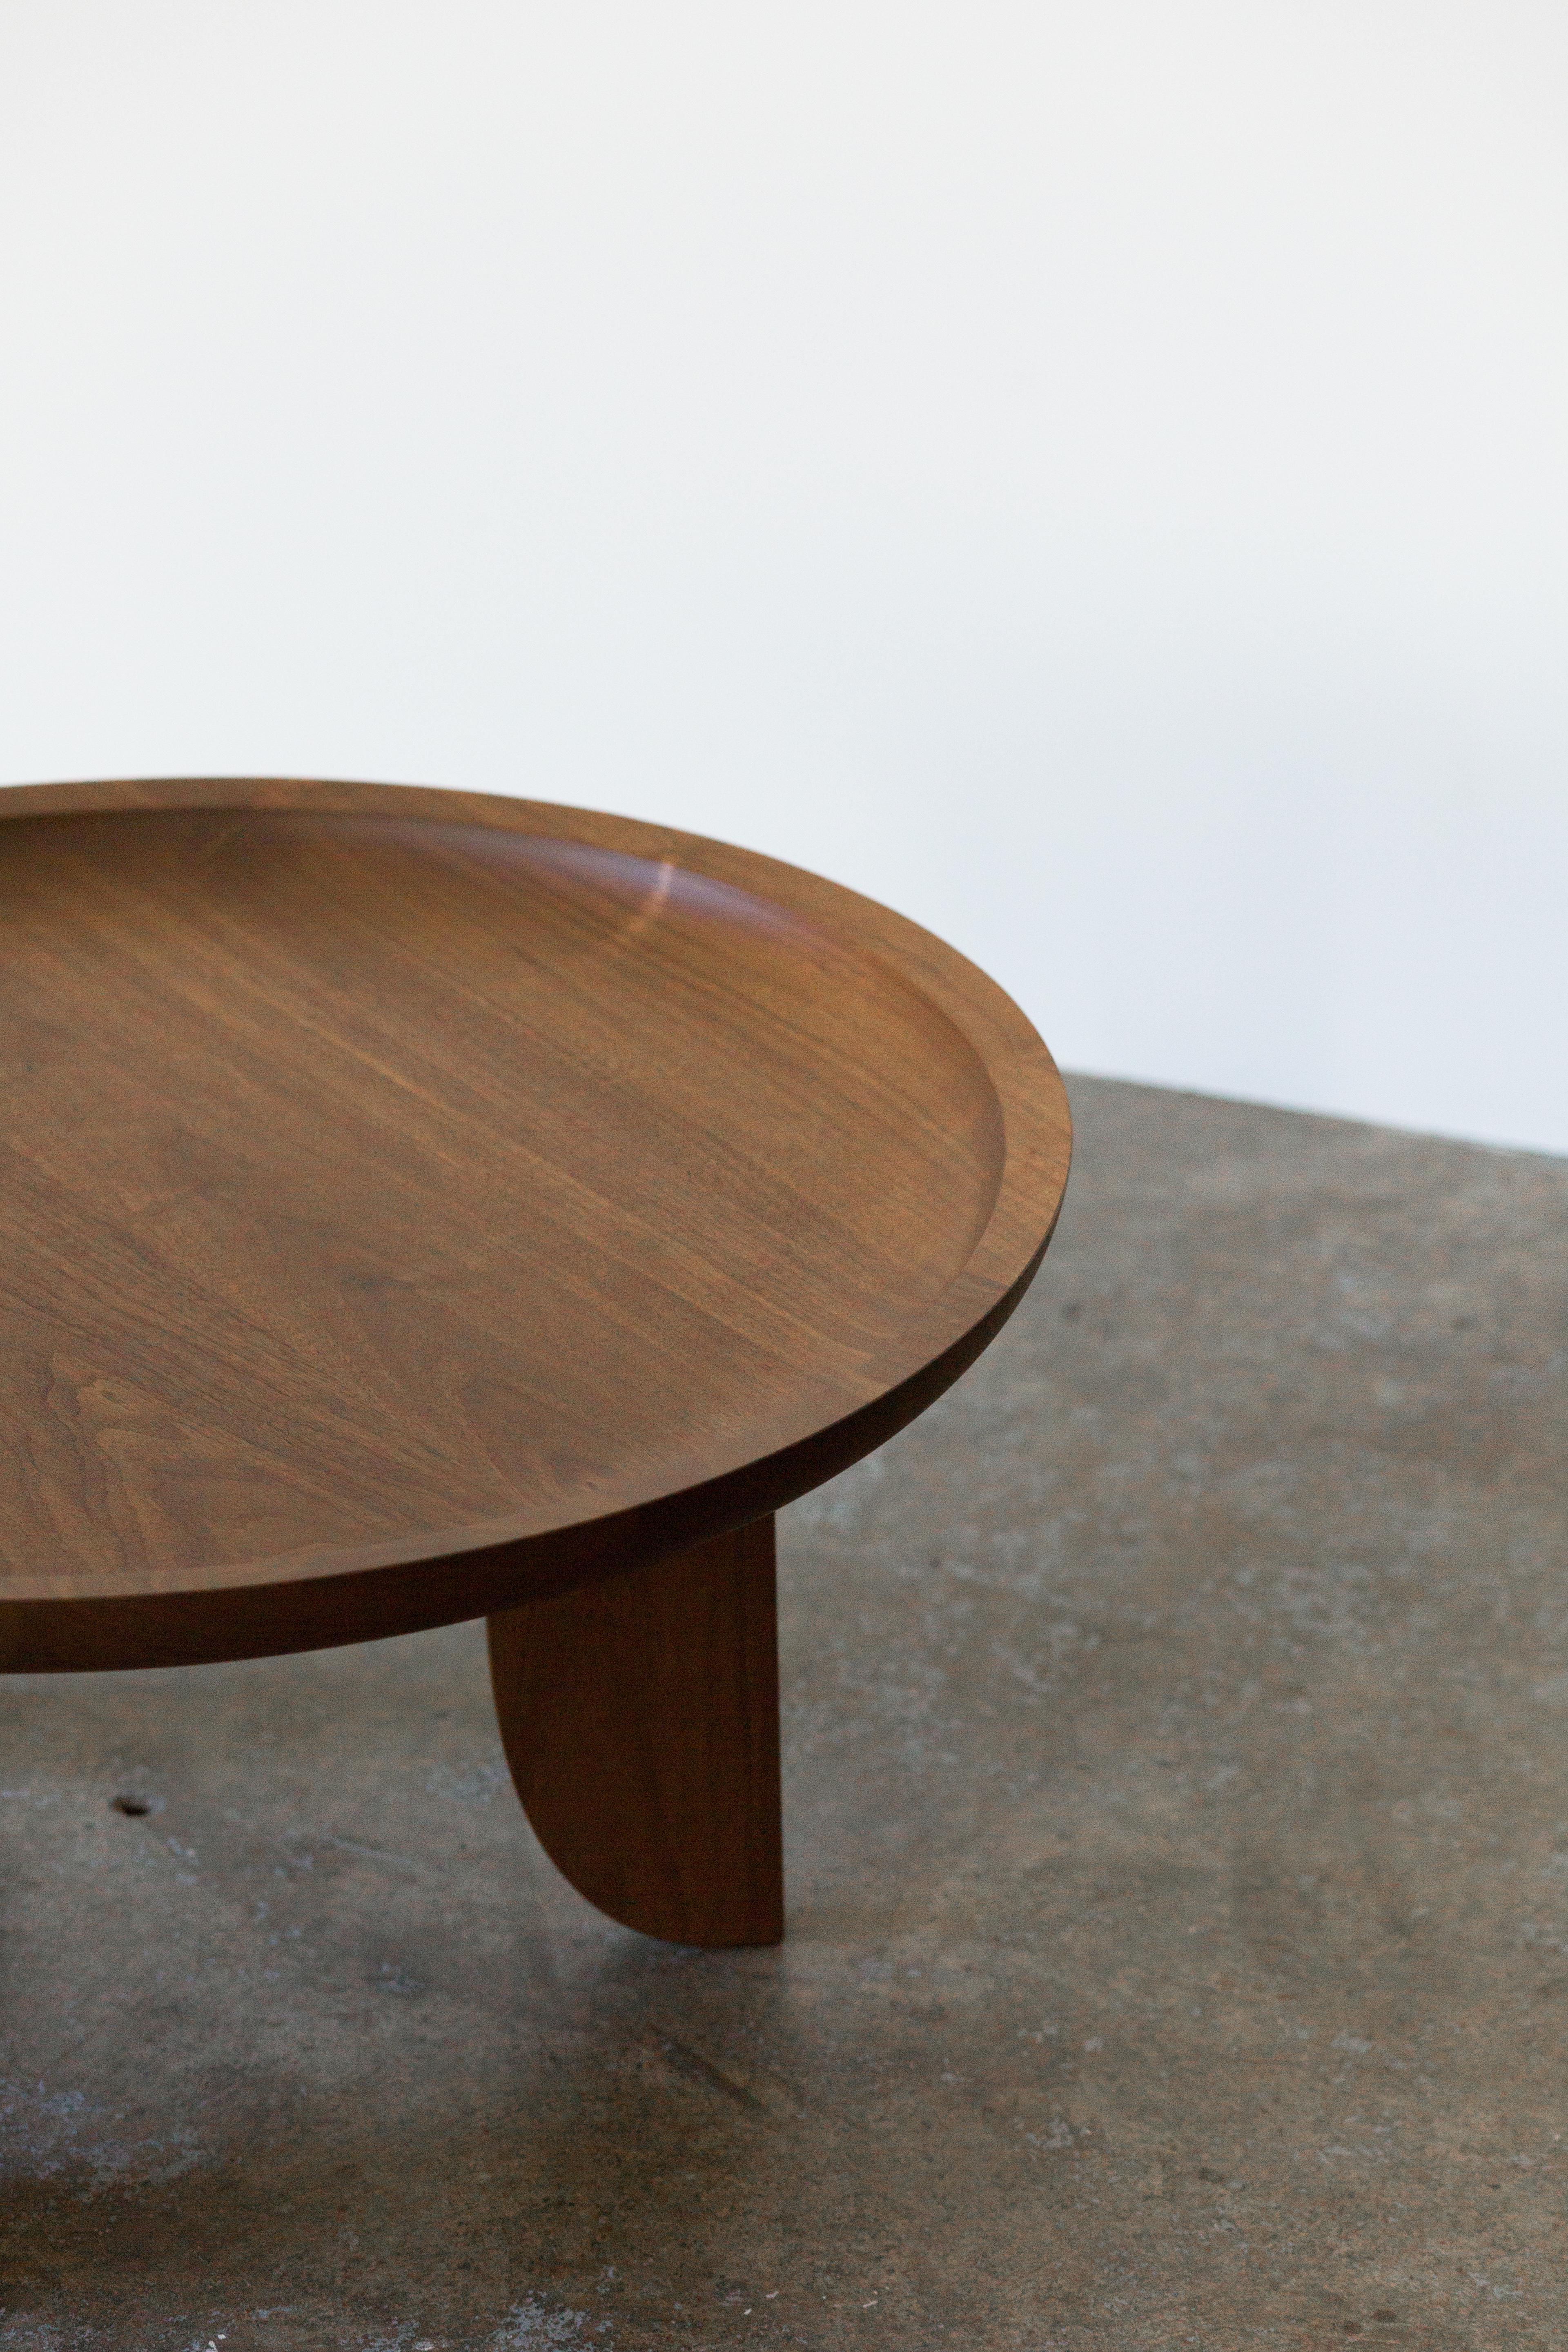 Dish Solid Wood Contemporary Sculptural Carved Side Coffee Table Walnut In New Condition For Sale In Bainbridge Island, WA